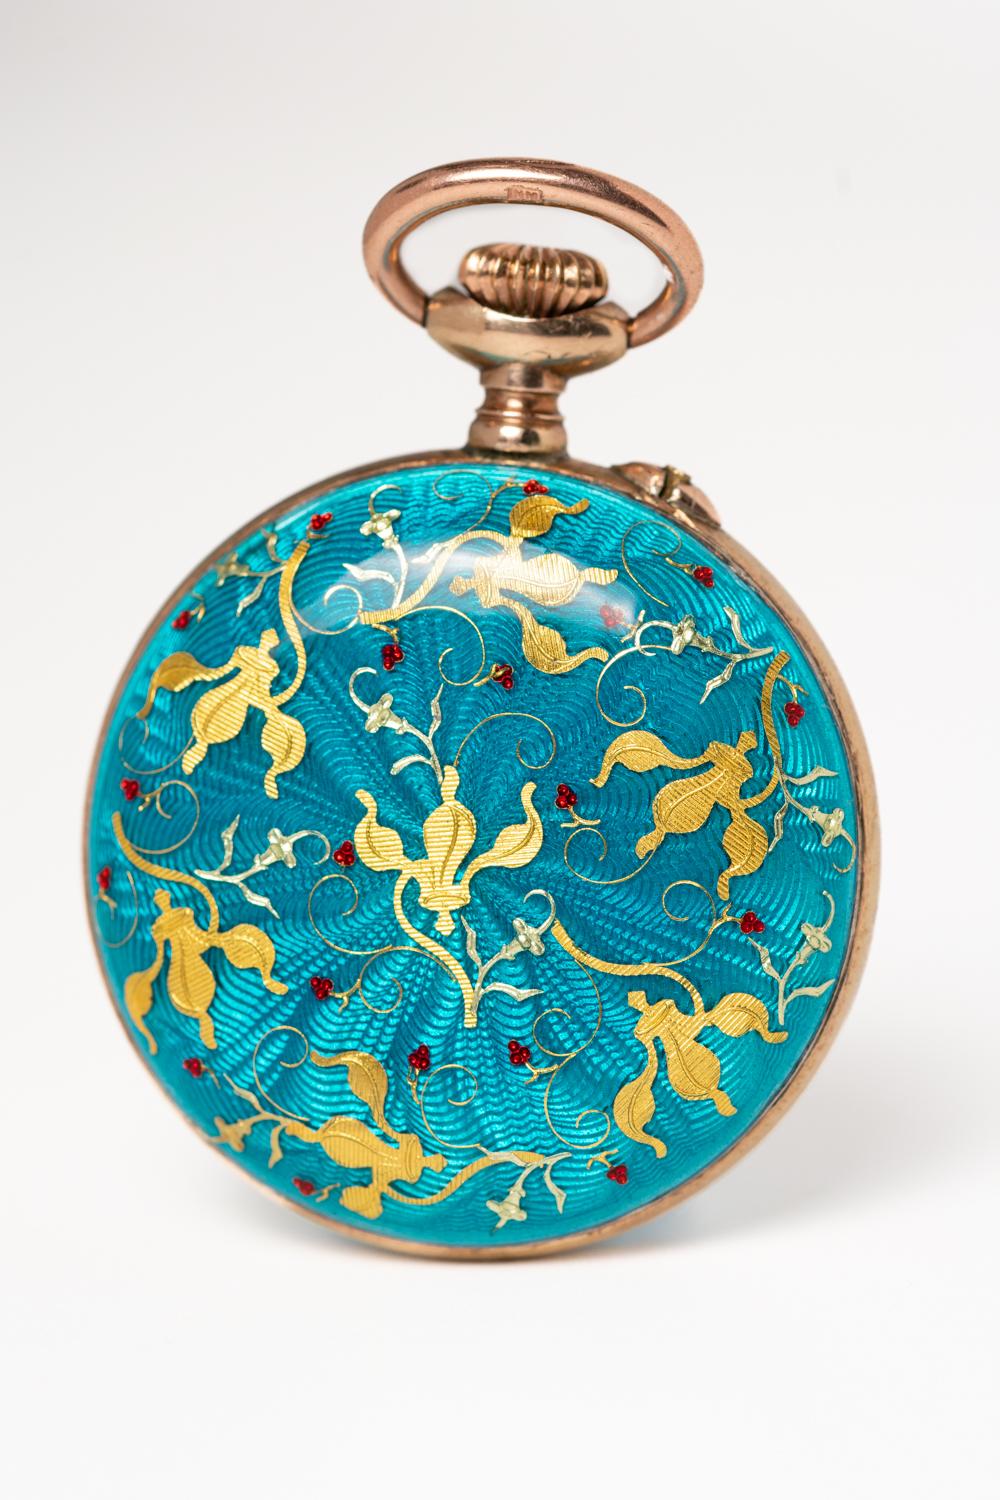 Antique Swiss Silver Gilt and Turquoise Blue Guilloche Enamel Pocket Watch/Pendant dated circa 1900 made by Fauvette HAD. This striking piece is decorated with a gold enamelled 'fleur-de-lis' motif and it's in an excellent condition considering its